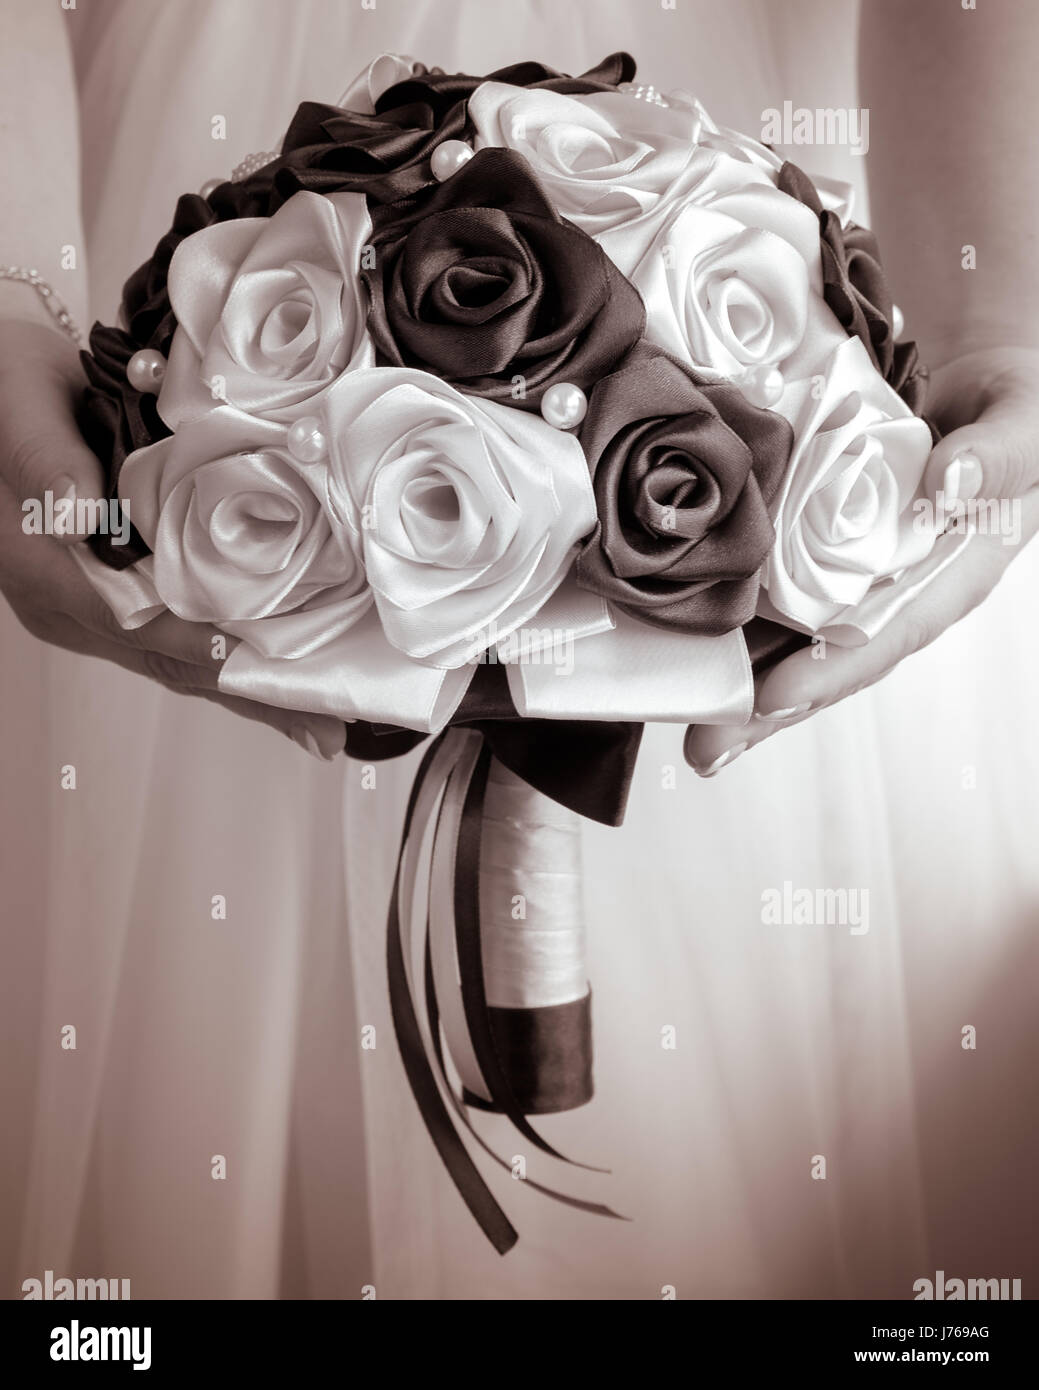 The bride's bouquet in hands on background of the wedding dress in monochrome tones Stock Photo